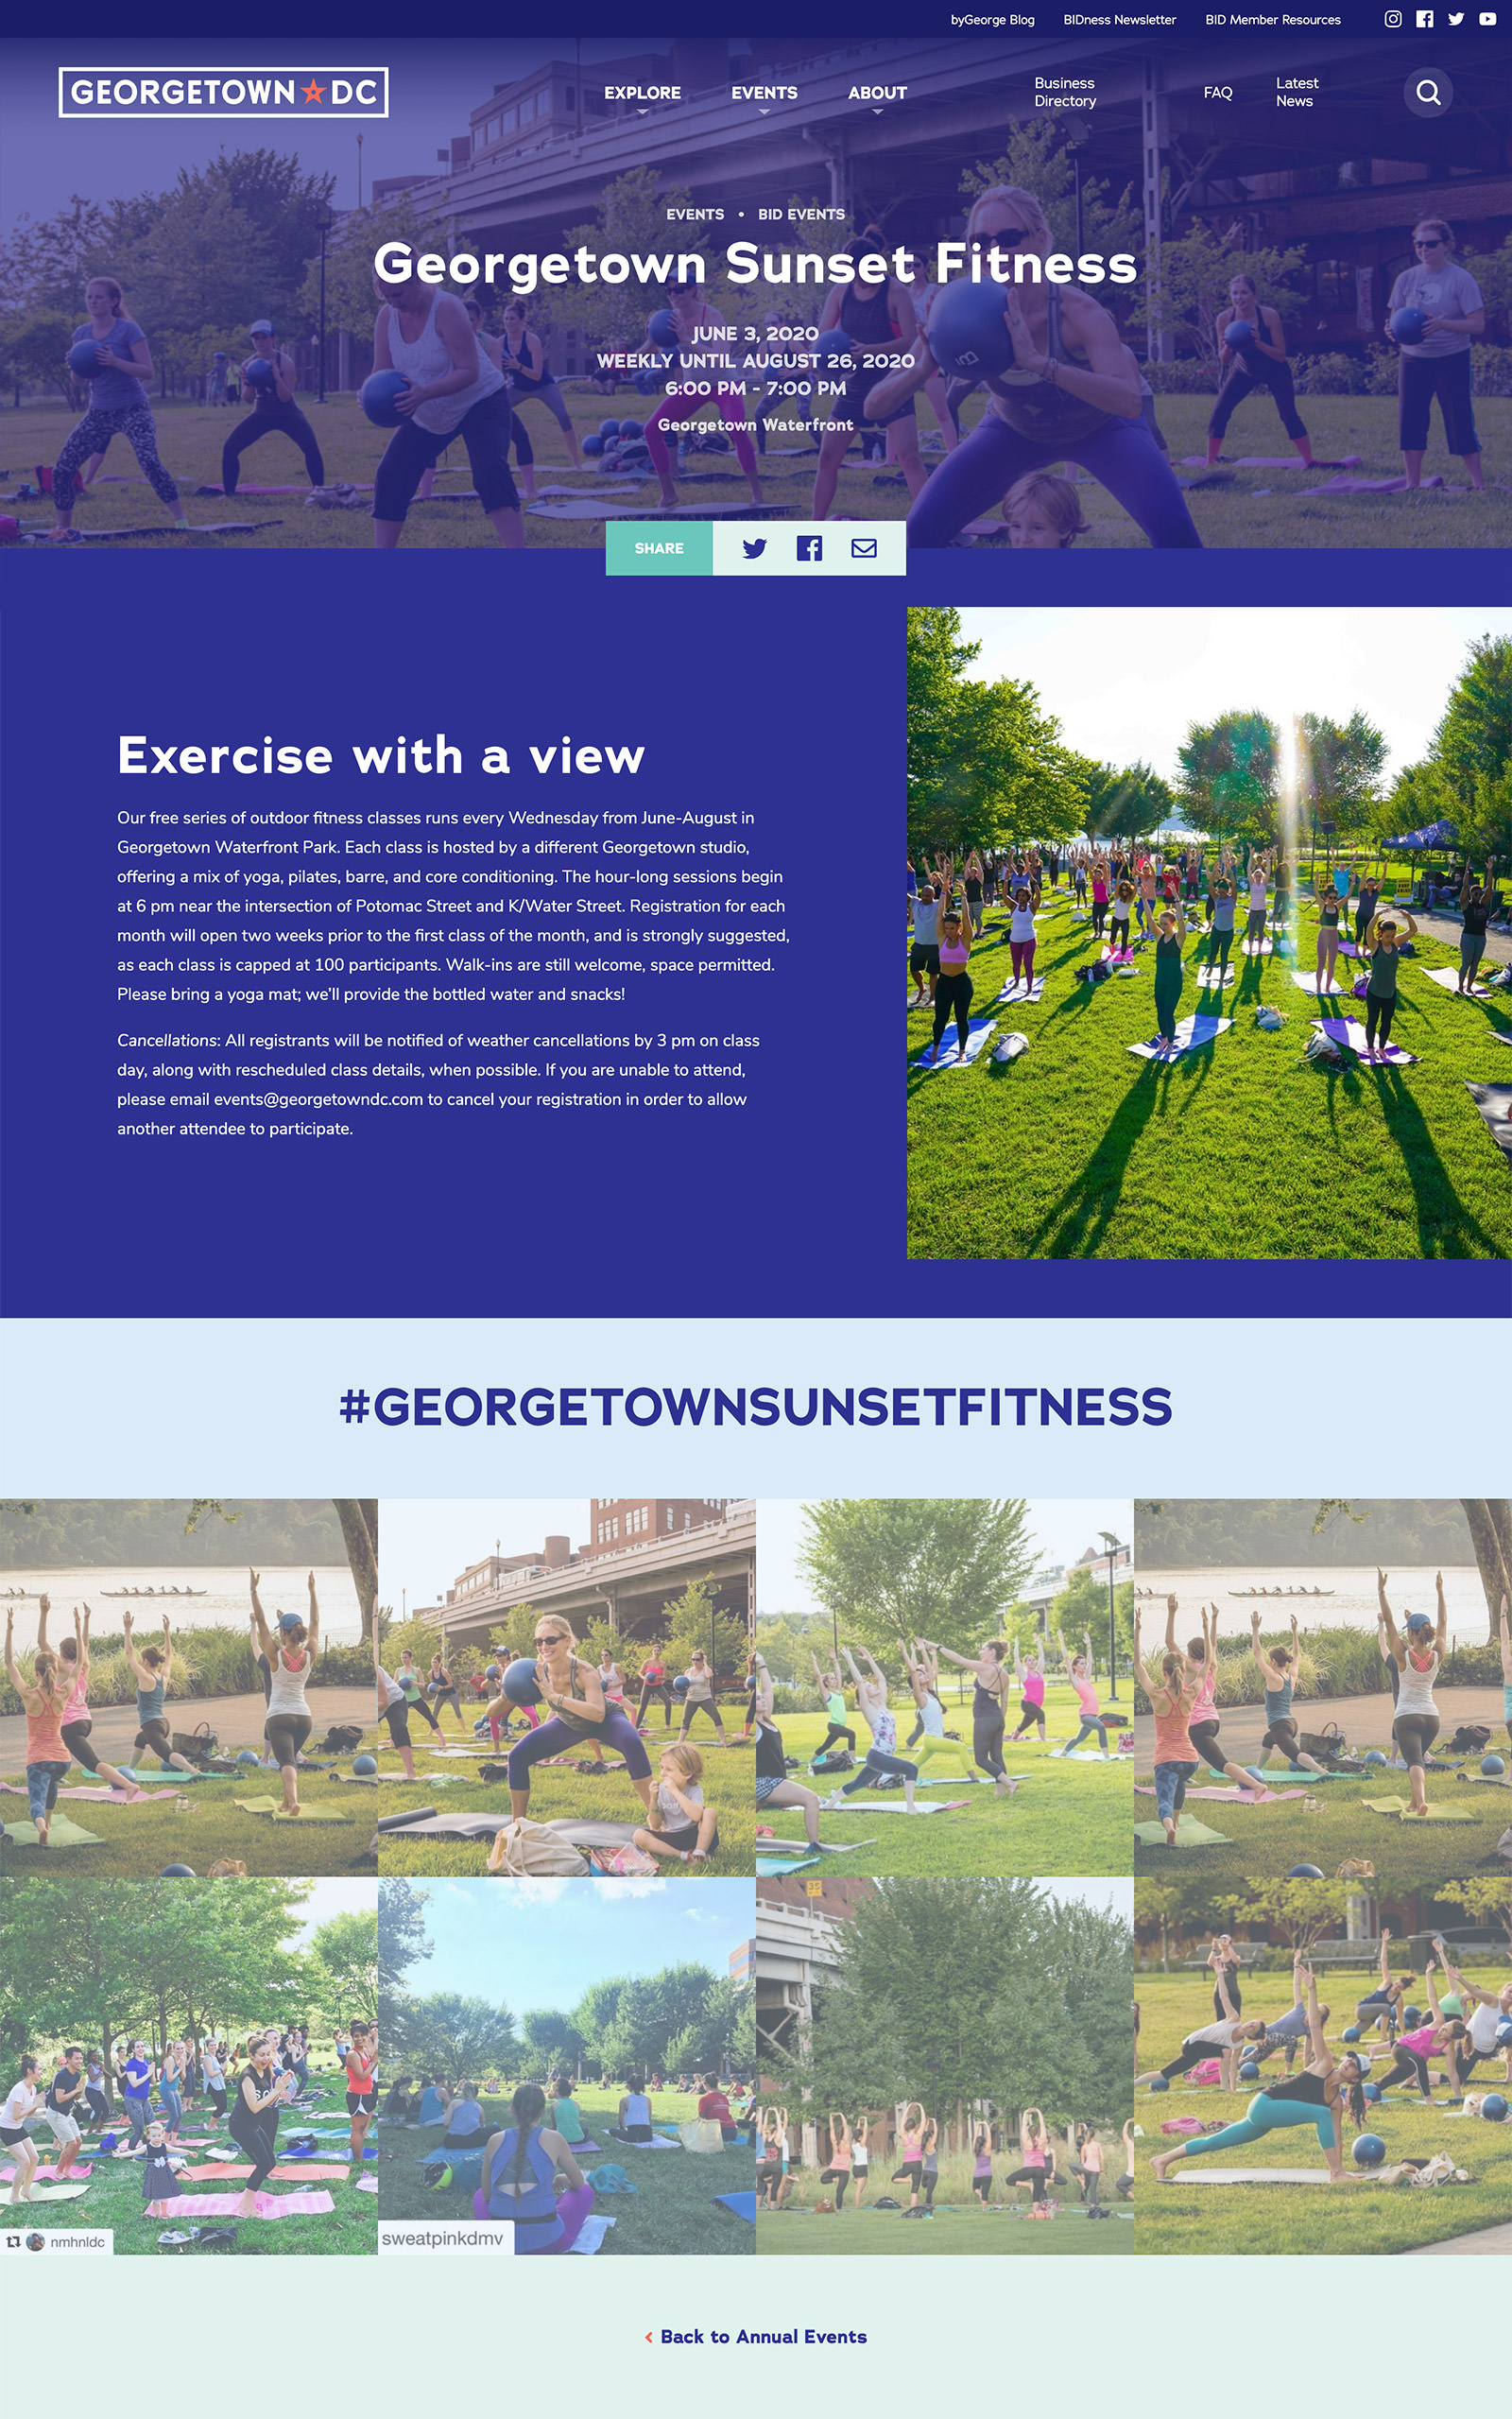 Event page design for the Georgetown site